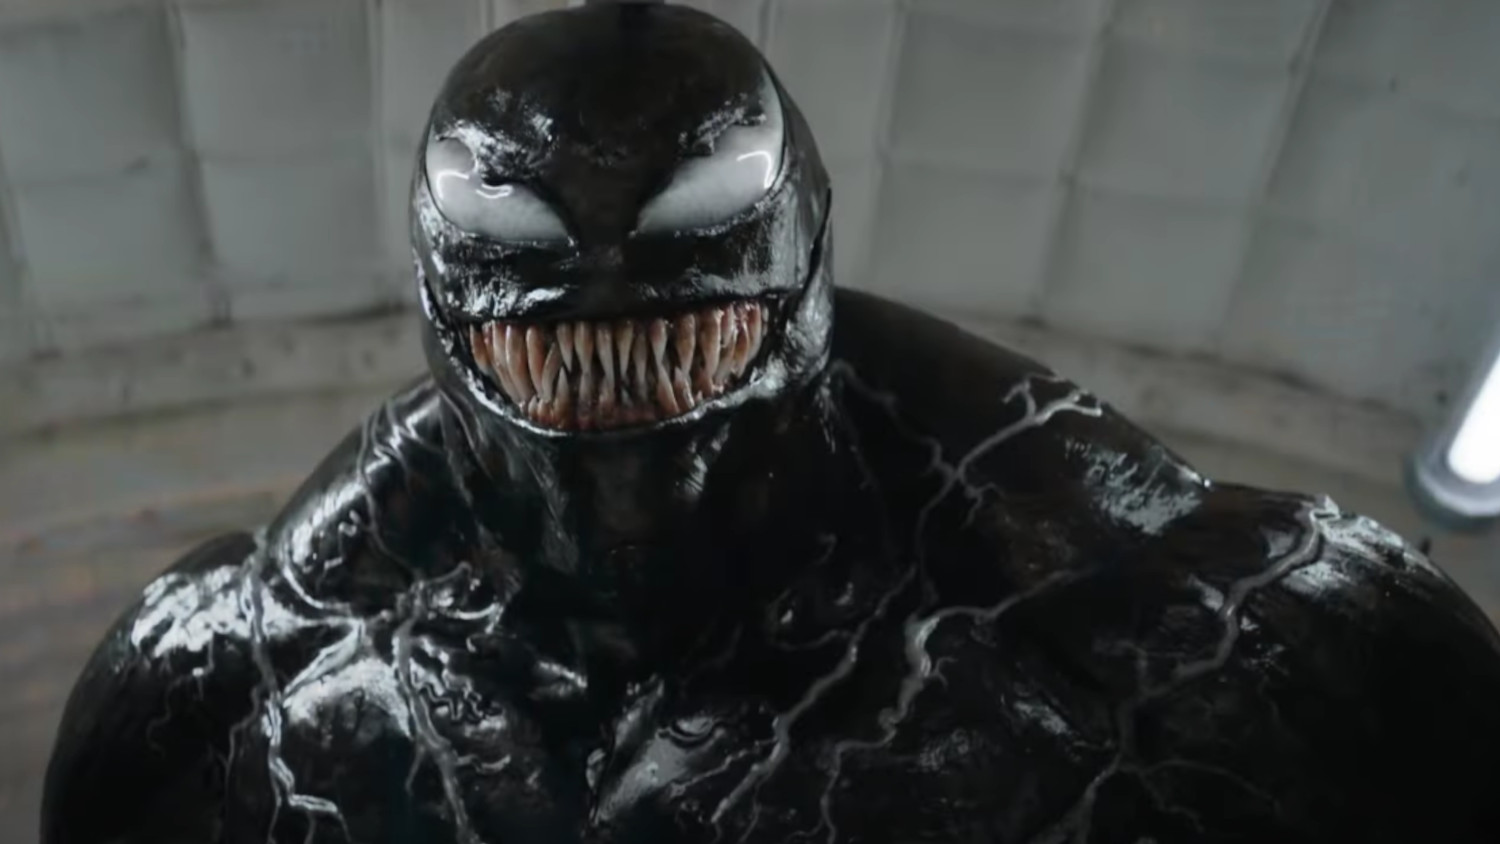 Venom: The Last Dance Trailer and Poster Tease ‘Til Death Do They Part’